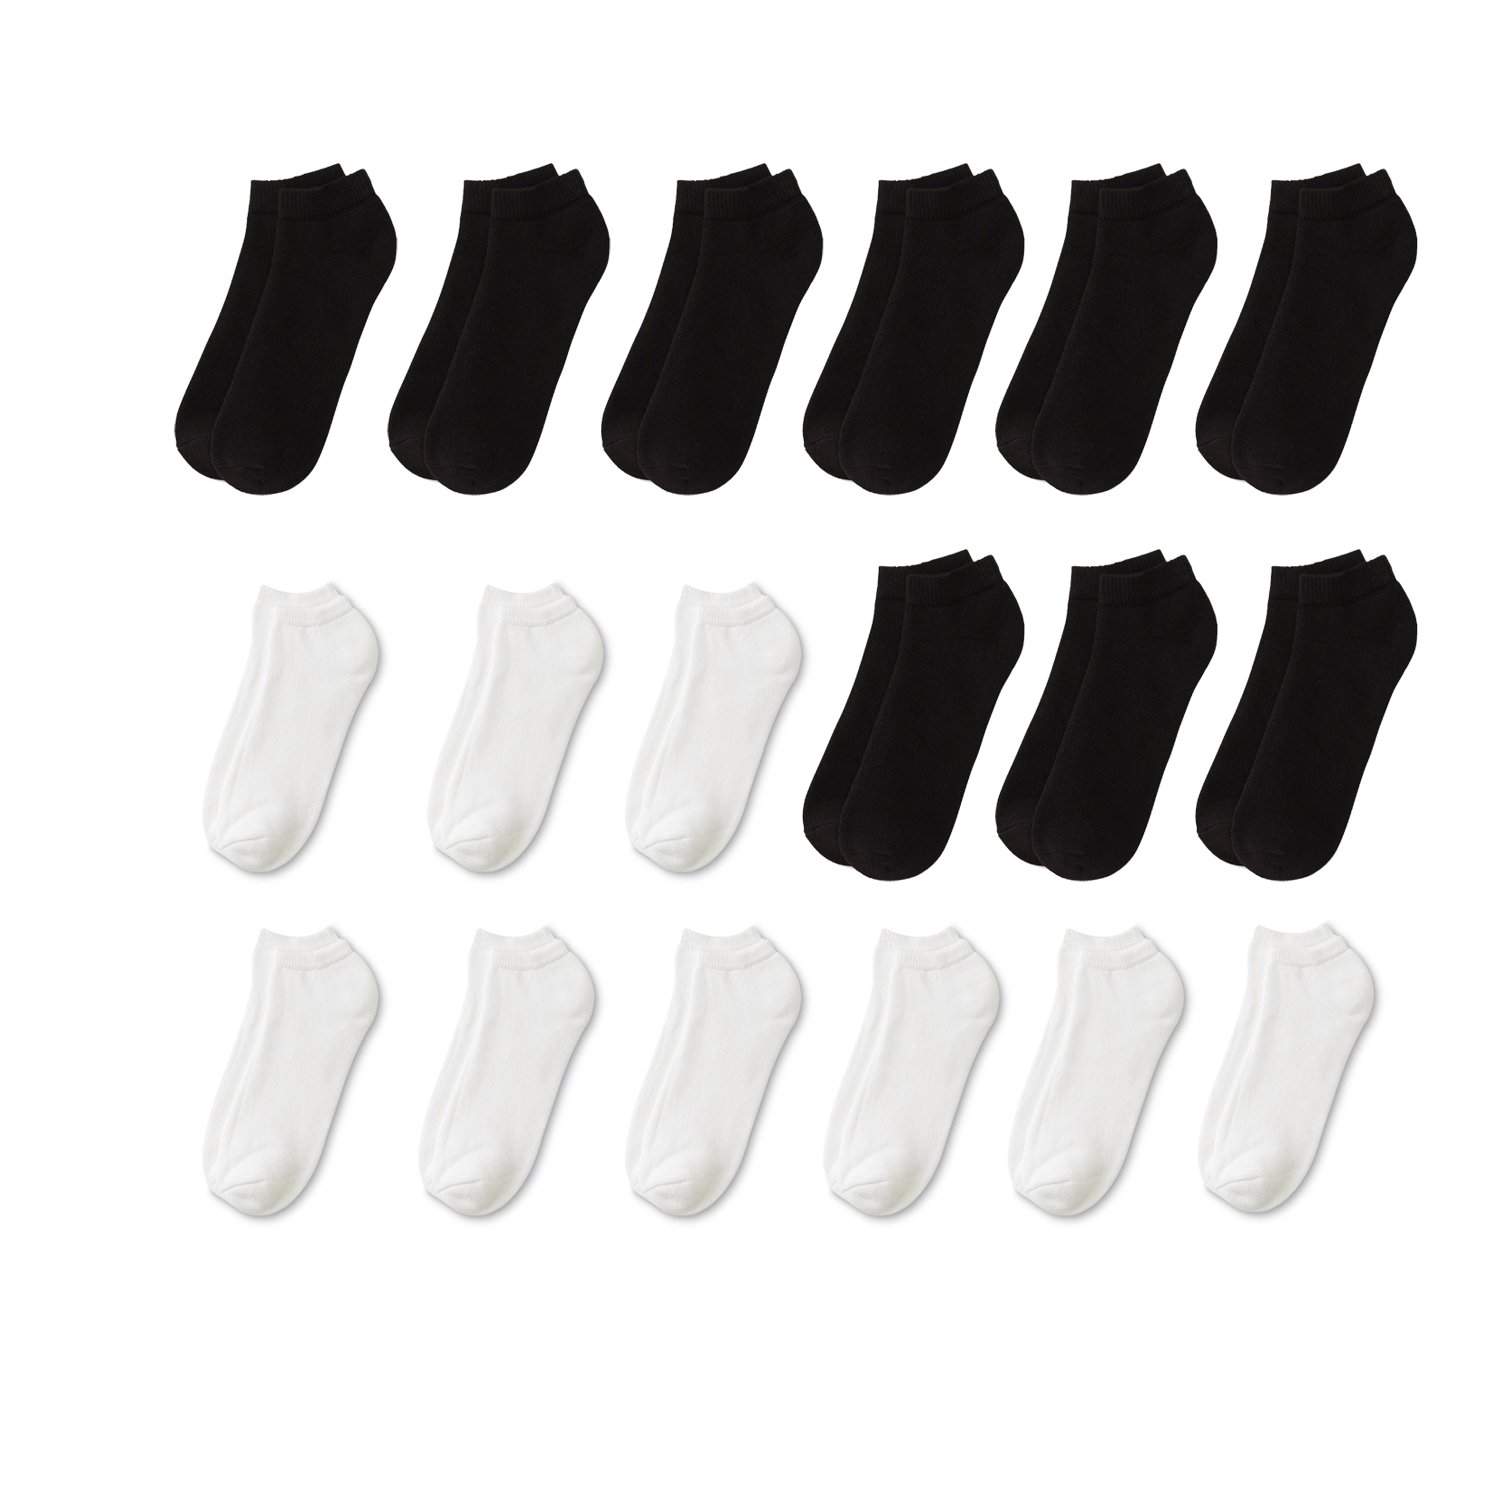 18 Pairs Men Low Cut Socks 9-11 or 6-8 Black or White or Mixed